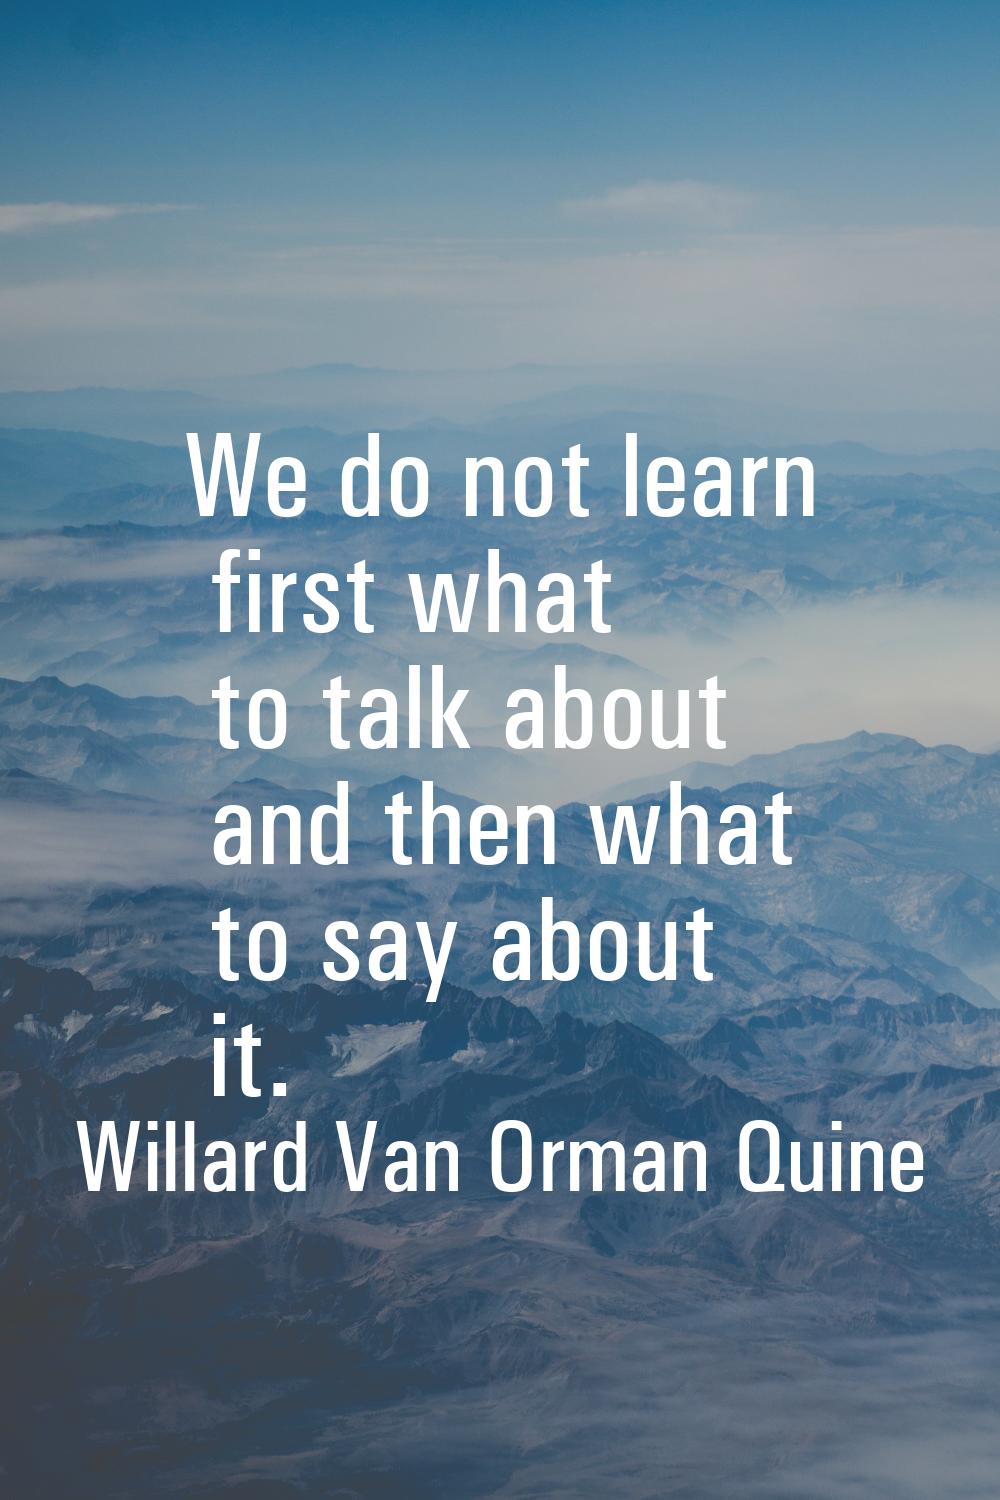 We do not learn first what to talk about and then what to say about it.